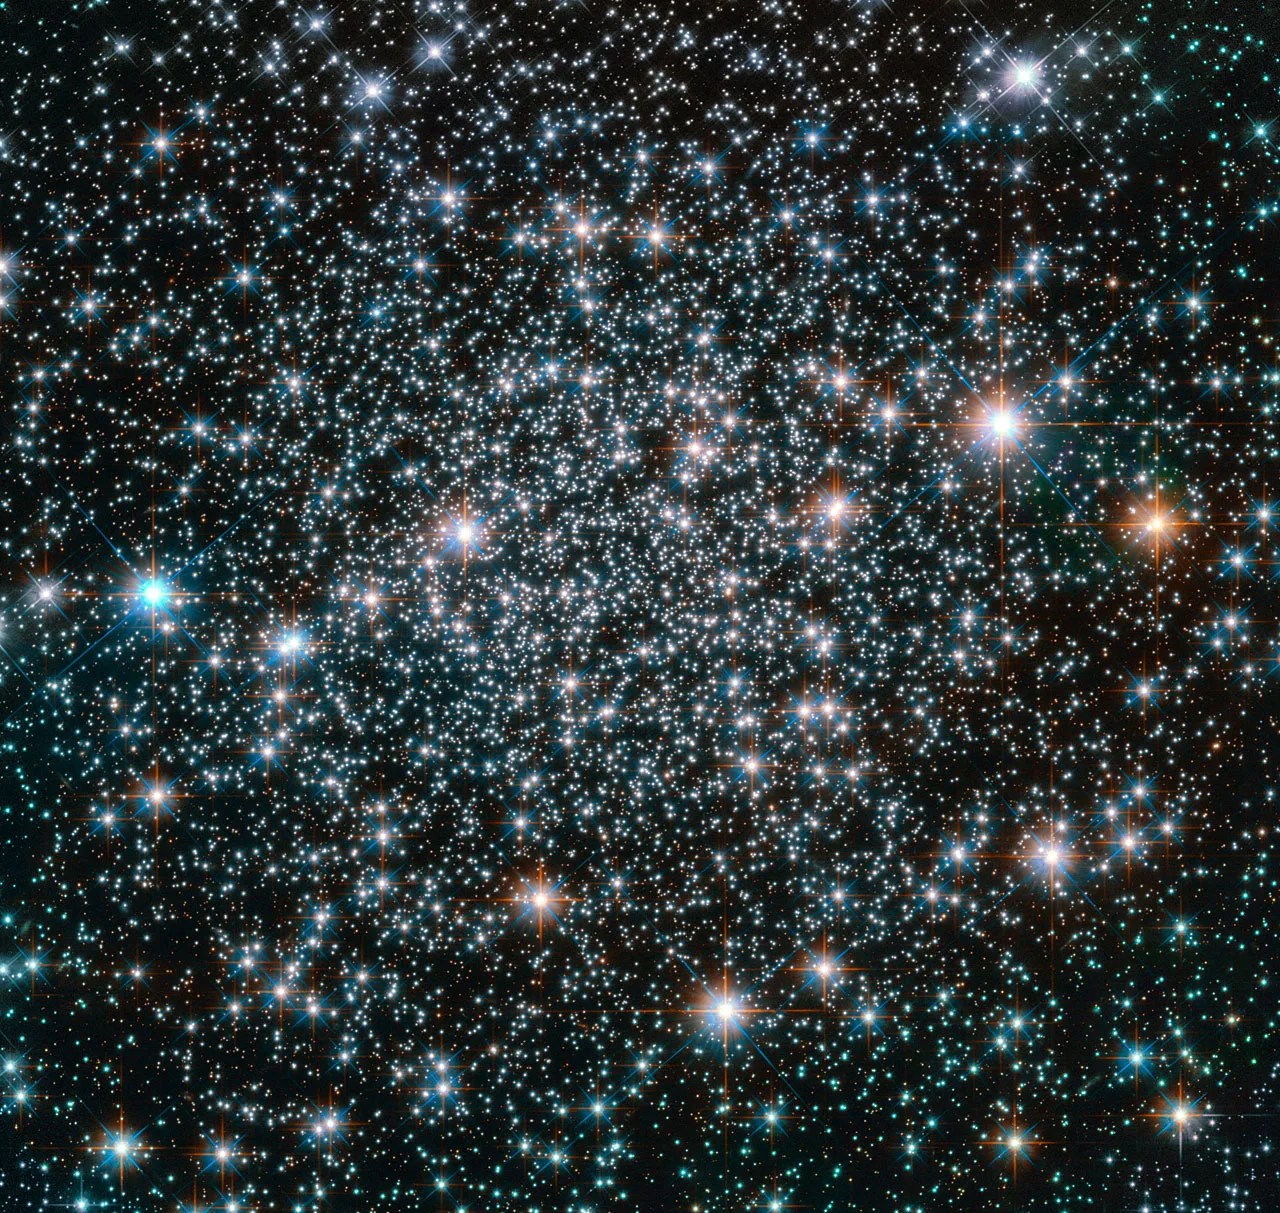 A cluster of bright stars, mostly white in color, fills this image. The stars are slightly thicker toward the center of the image Several bright large stars have diffraction spikes.